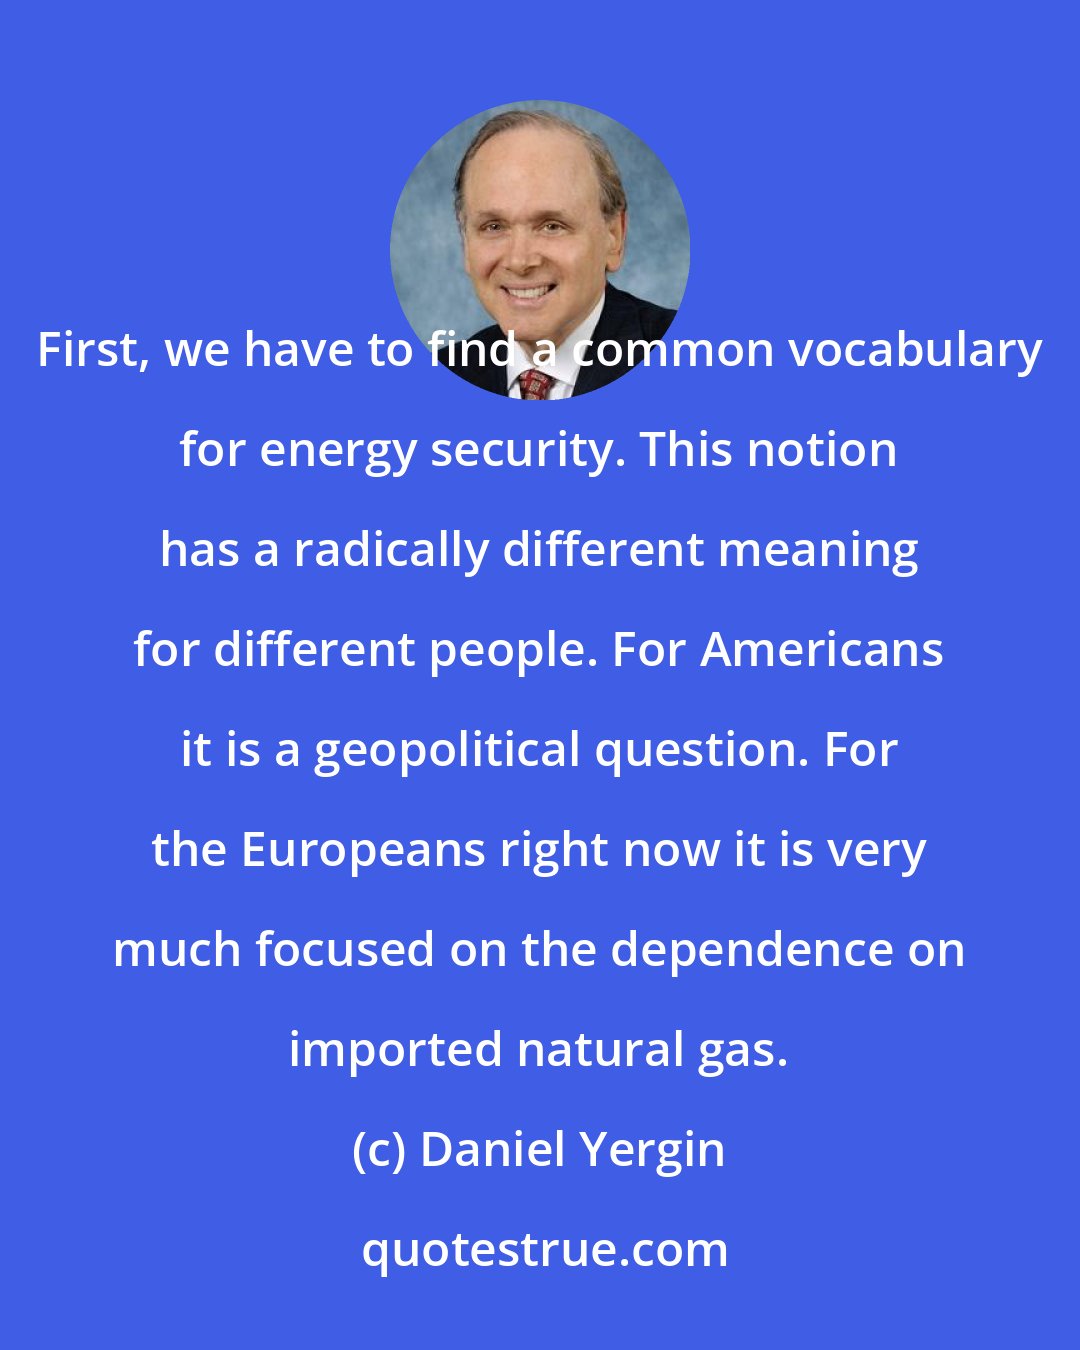 Daniel Yergin: First, we have to find a common vocabulary for energy security. This notion has a radically different meaning for different people. For Americans it is a geopolitical question. For the Europeans right now it is very much focused on the dependence on imported natural gas.